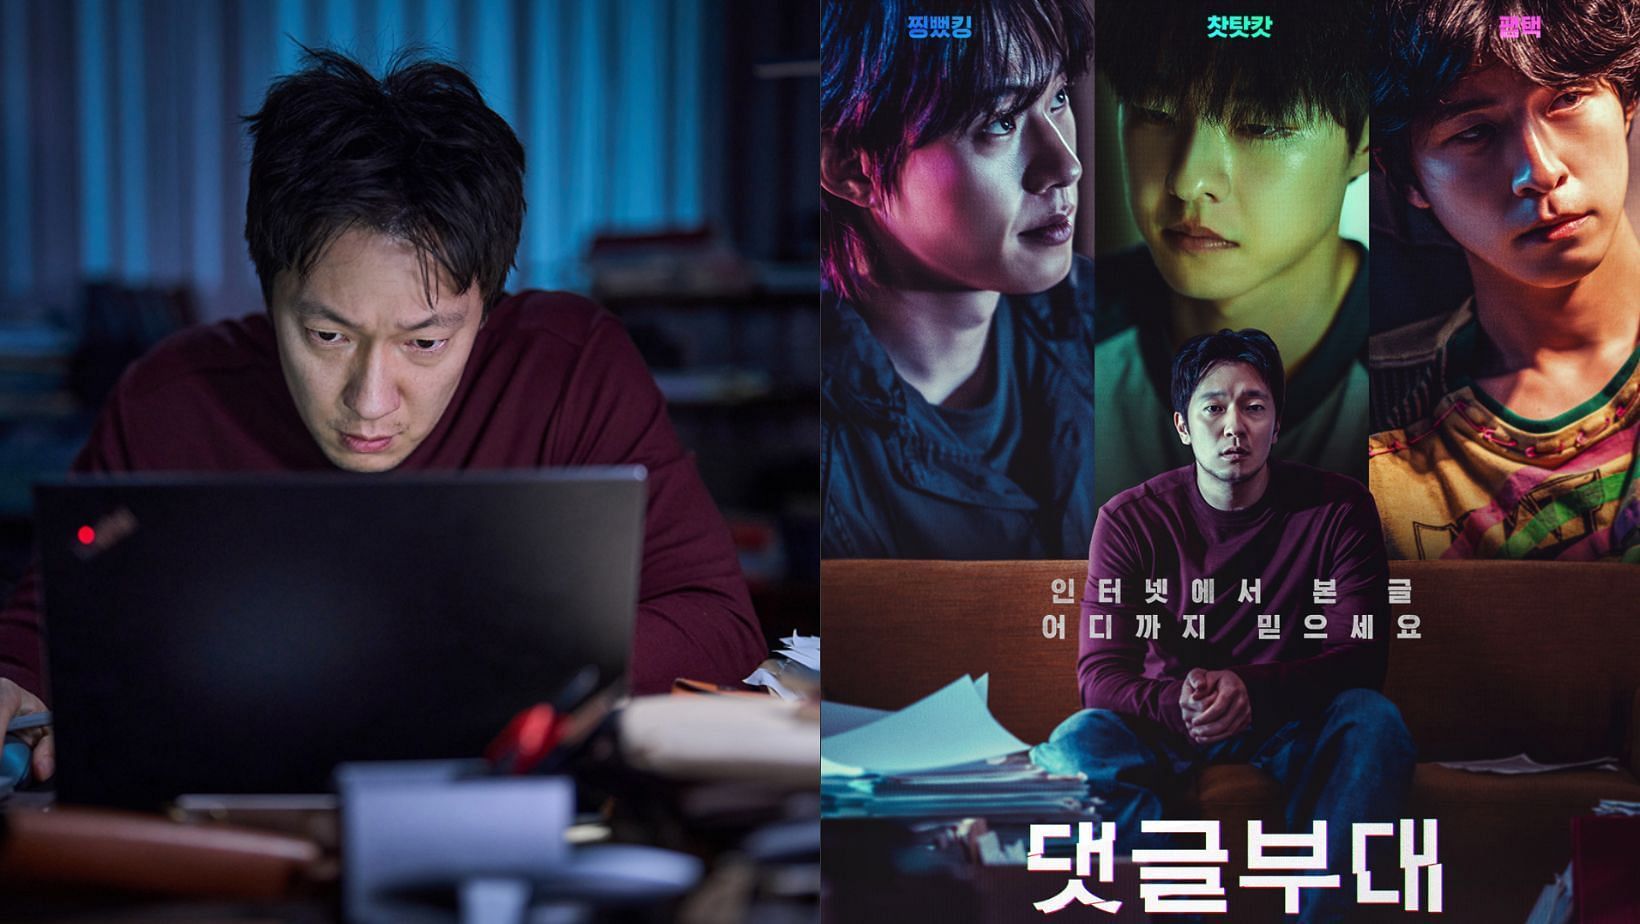 Son Suk-Ku and Kim Sung-Cheol starring Troll Factory. (Images via Instagram/@acemaker.movie)